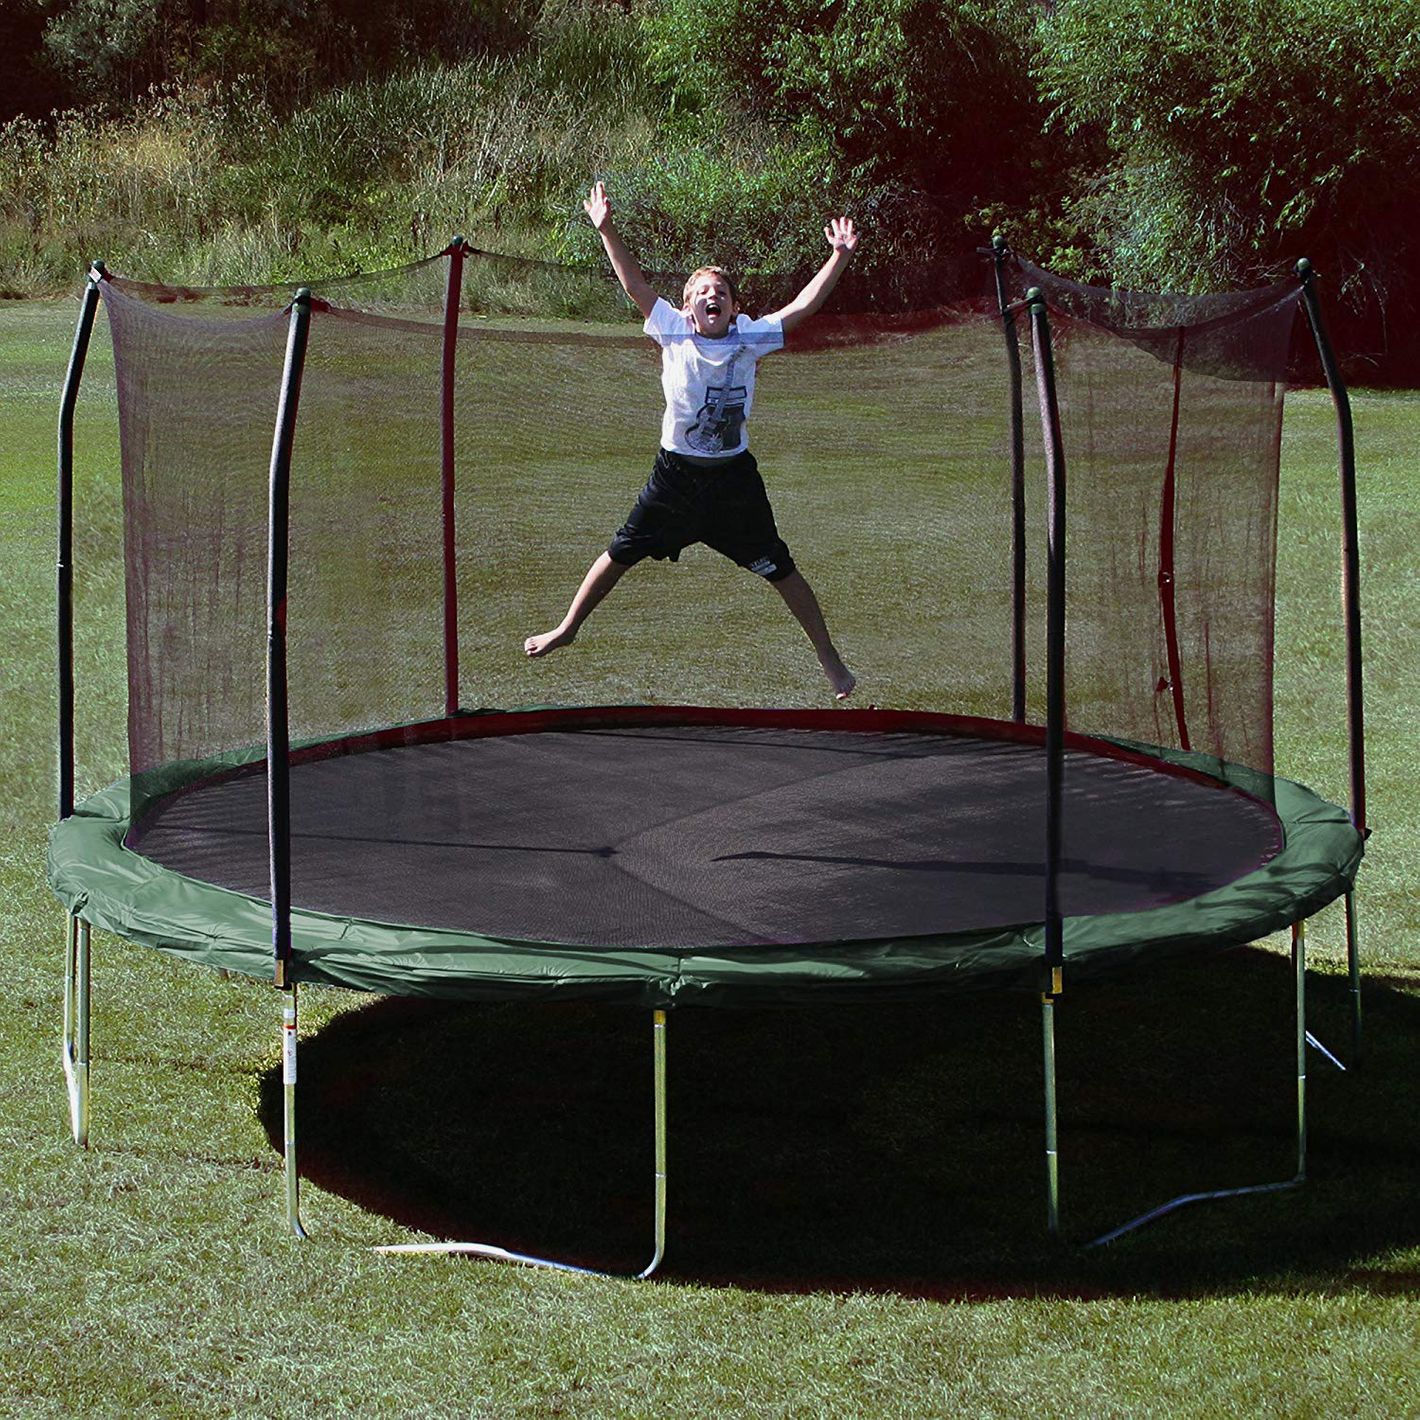 MIARHB 12 FT Kids Trampoline Suitable for Indoor and Outdoor Garden Workout use Fitness Trampolines Mini Trampoline with Enclosure Net